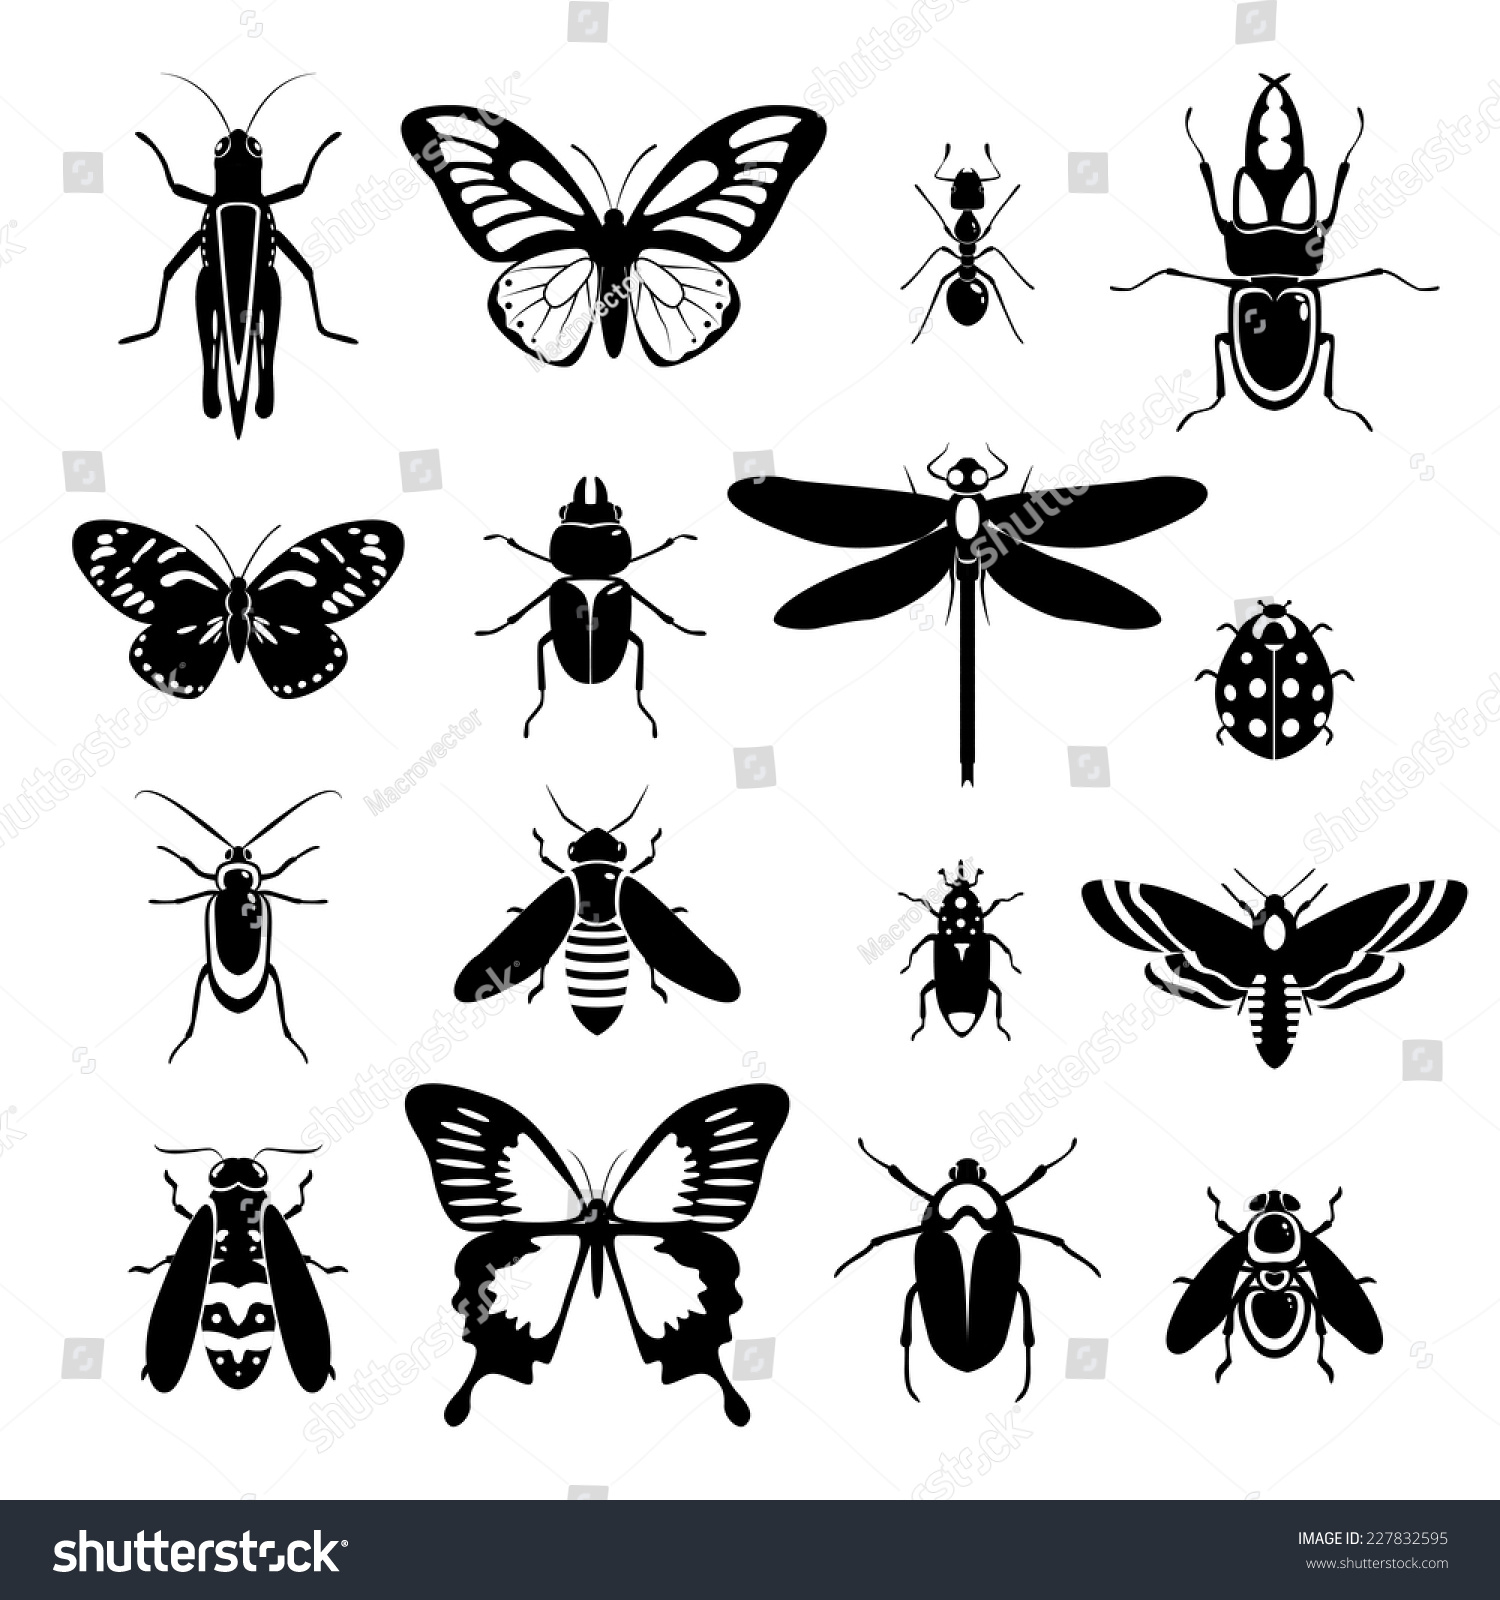 clipart insects black and white - photo #39